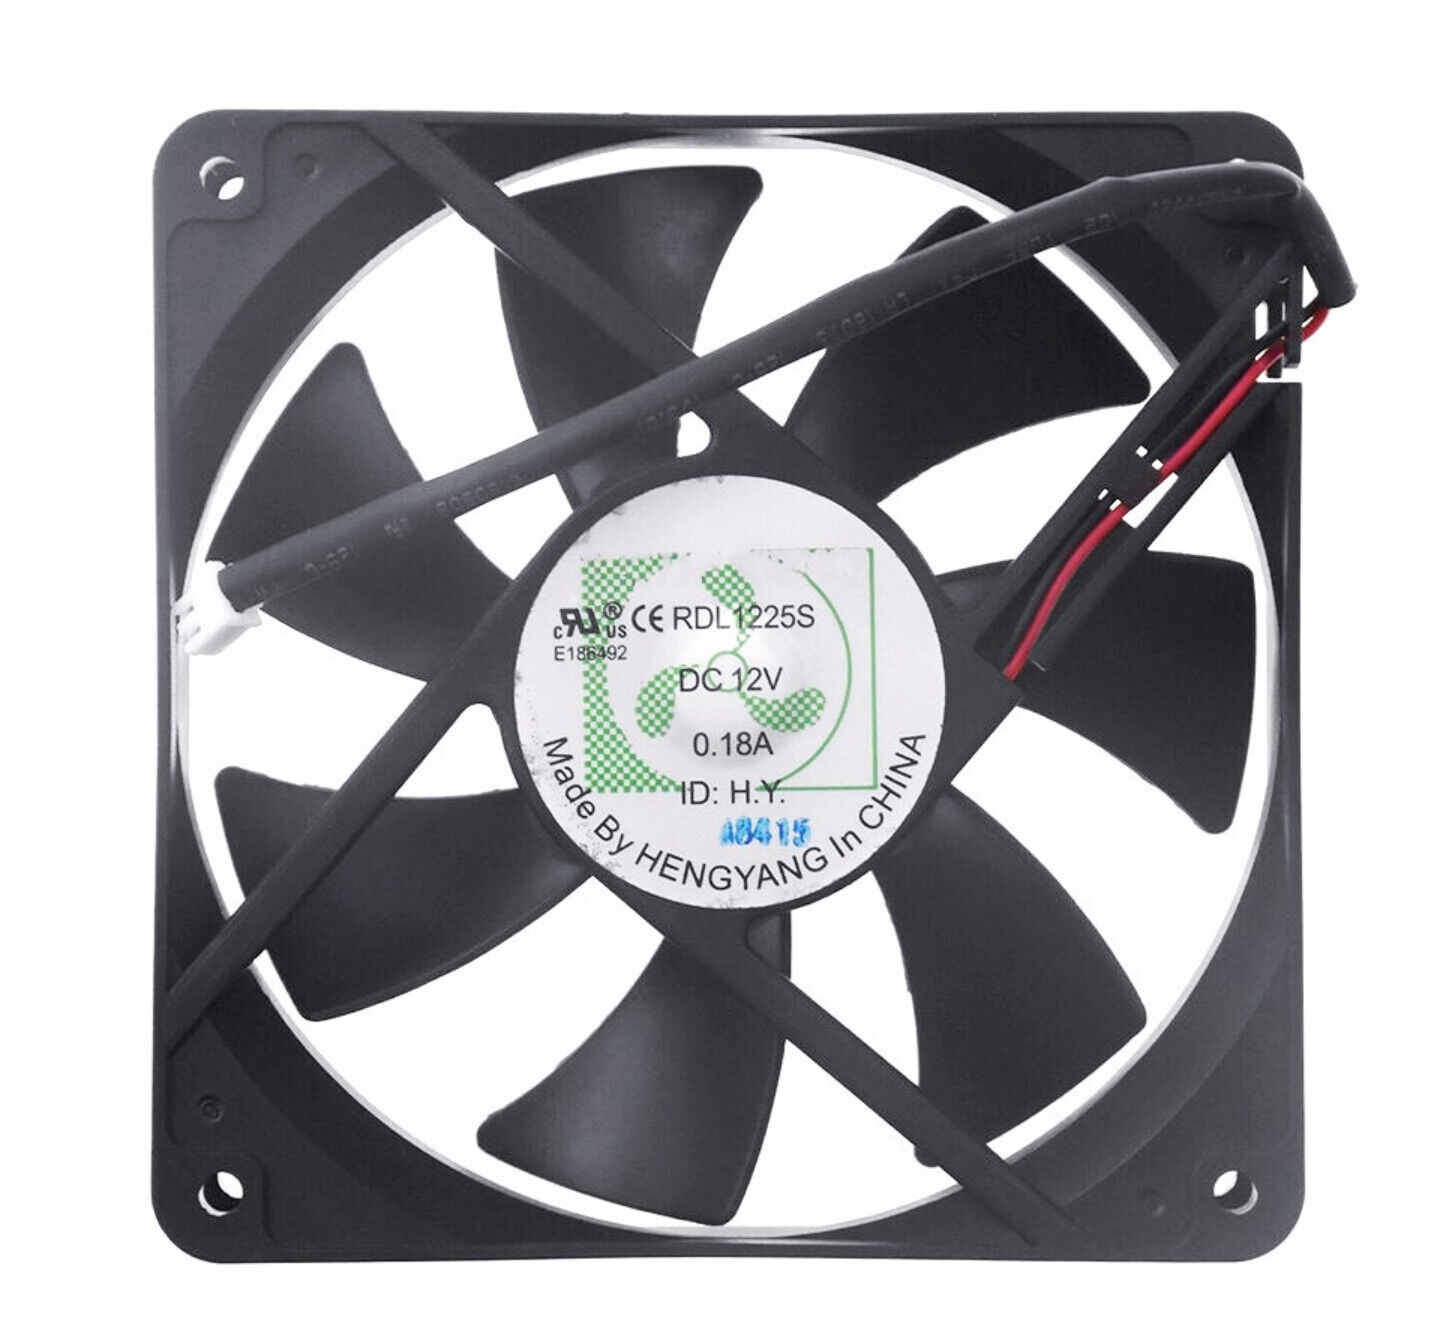 For RUILIAN SCIENCE RDL1225S 12025 12V 0.18A Cooling fan 2pin 120*120*25mm